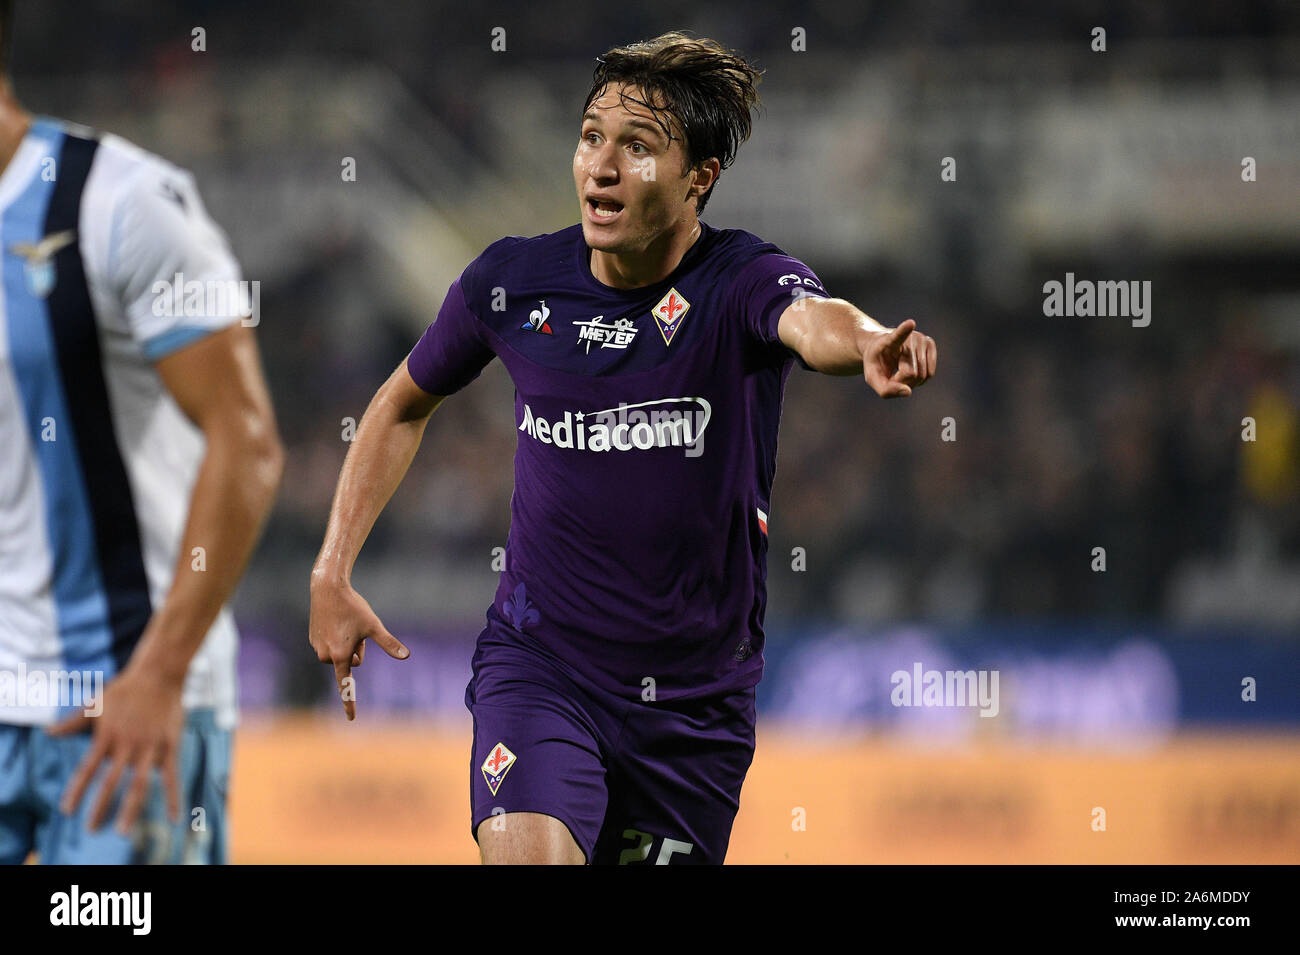 Firenze, Italy, 27 Oct 2019, the grinta of federico chiesa during - Italian  Soccer Serie A Men Championship - Credit: LPS/Matteo Papini/Alamy Live News  Stock Photo - Alamy